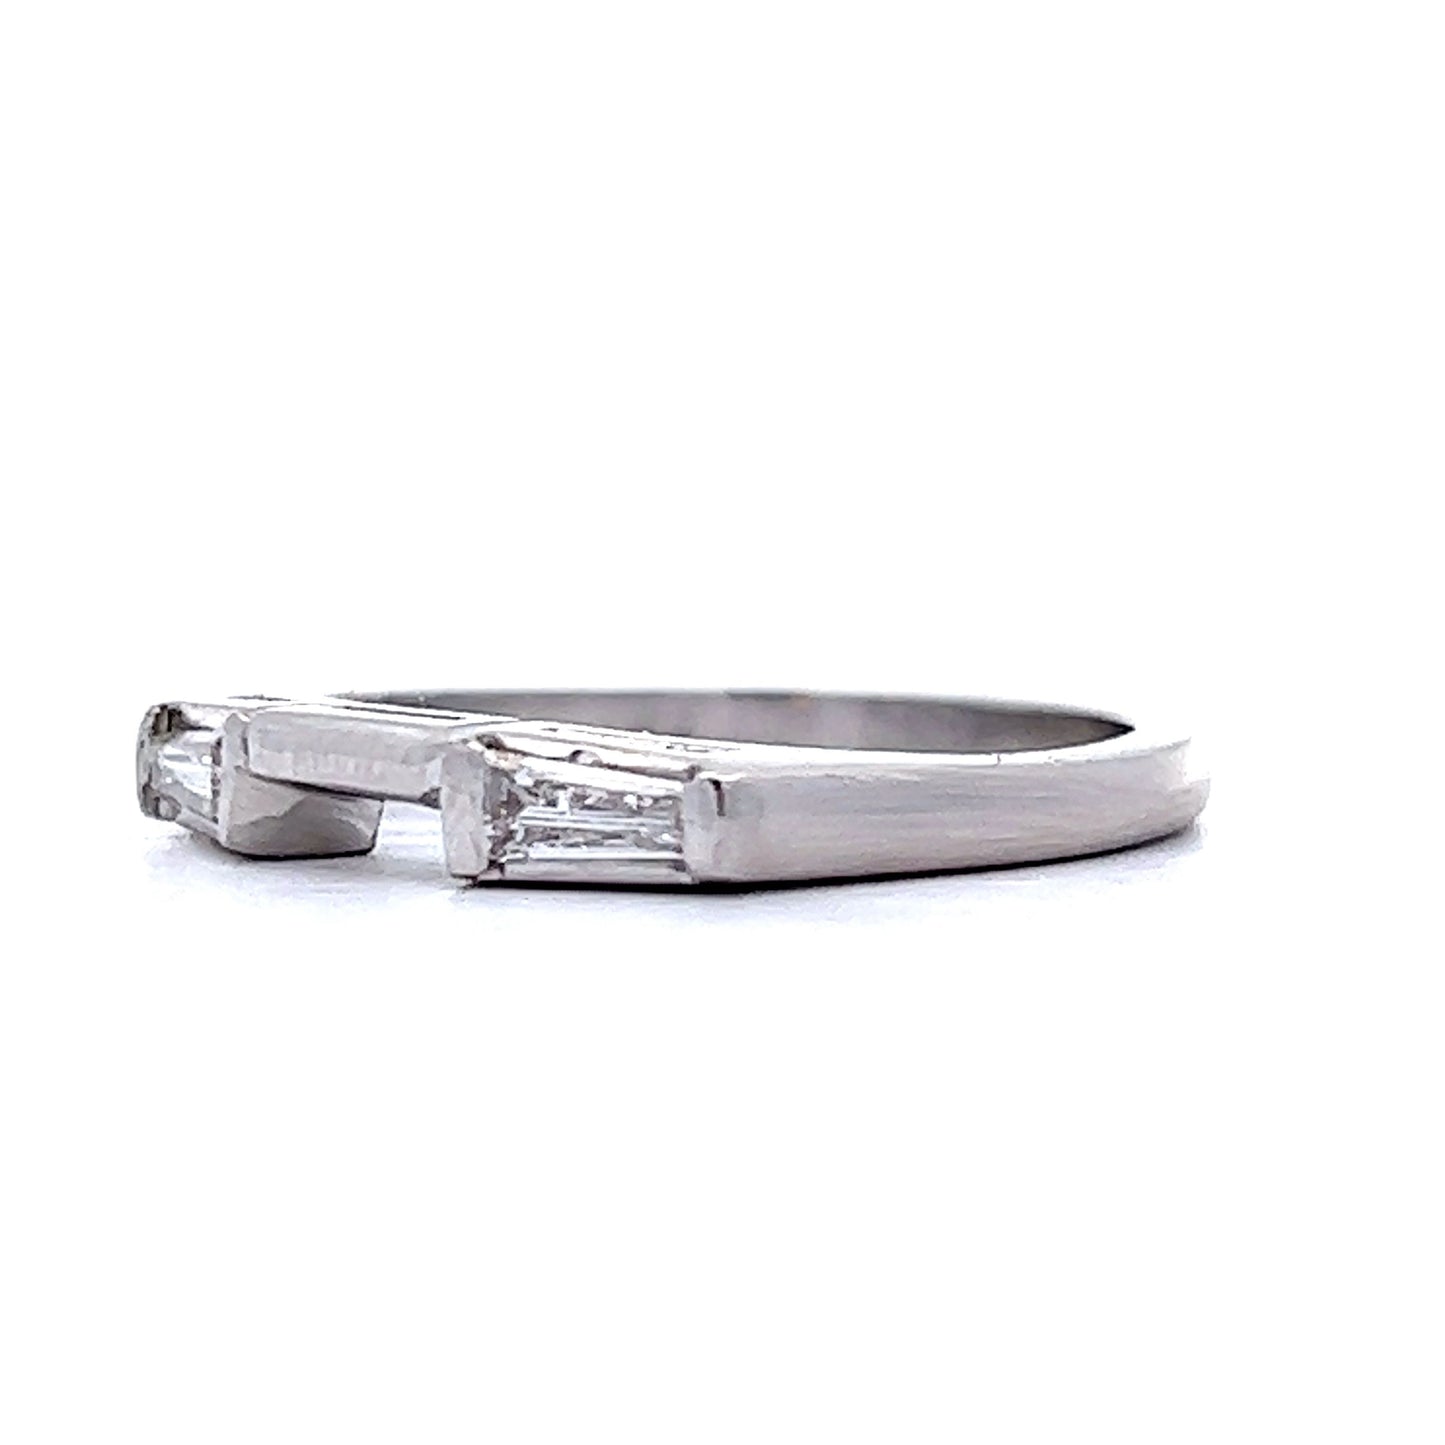 .15 Tapered Baguette Diamond Wedding Band in Platinum